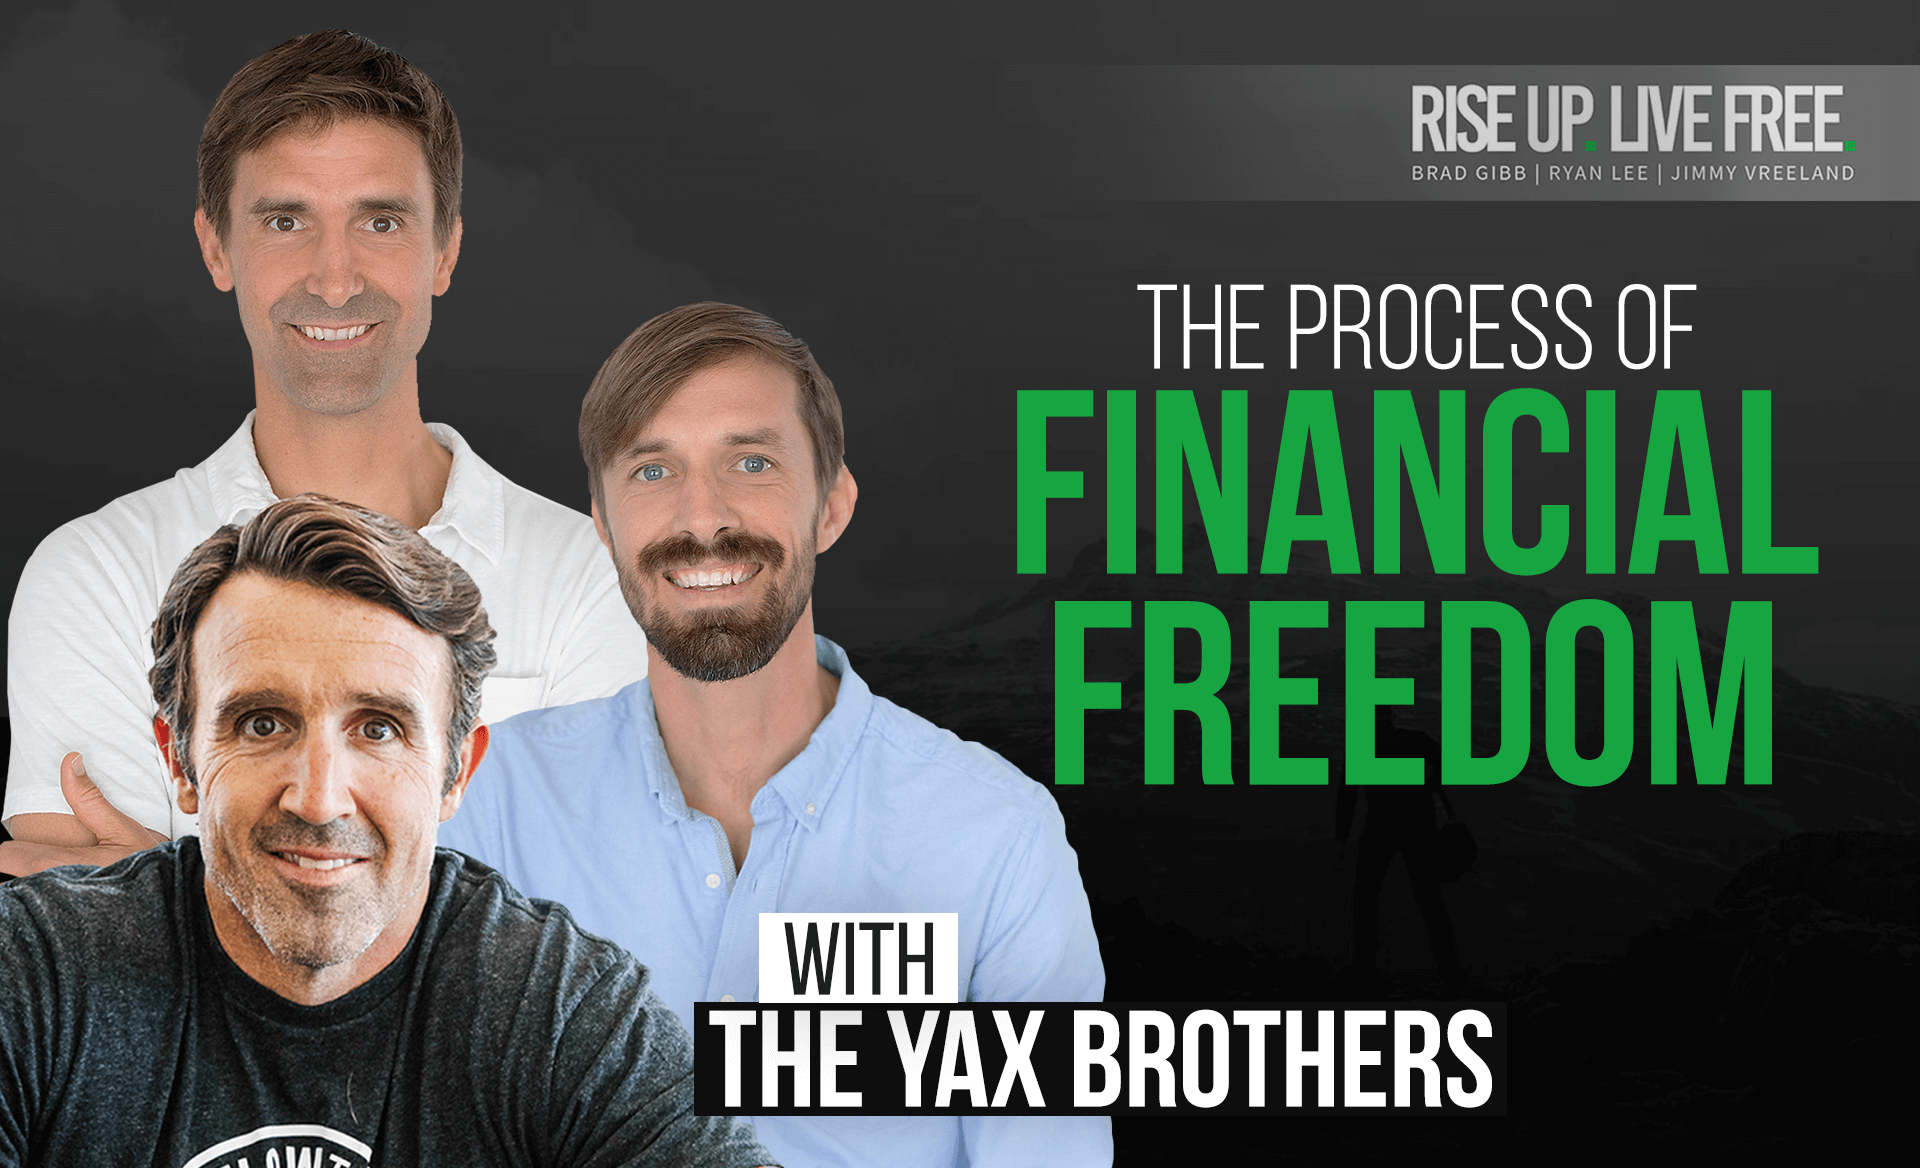 The process of financial freedom